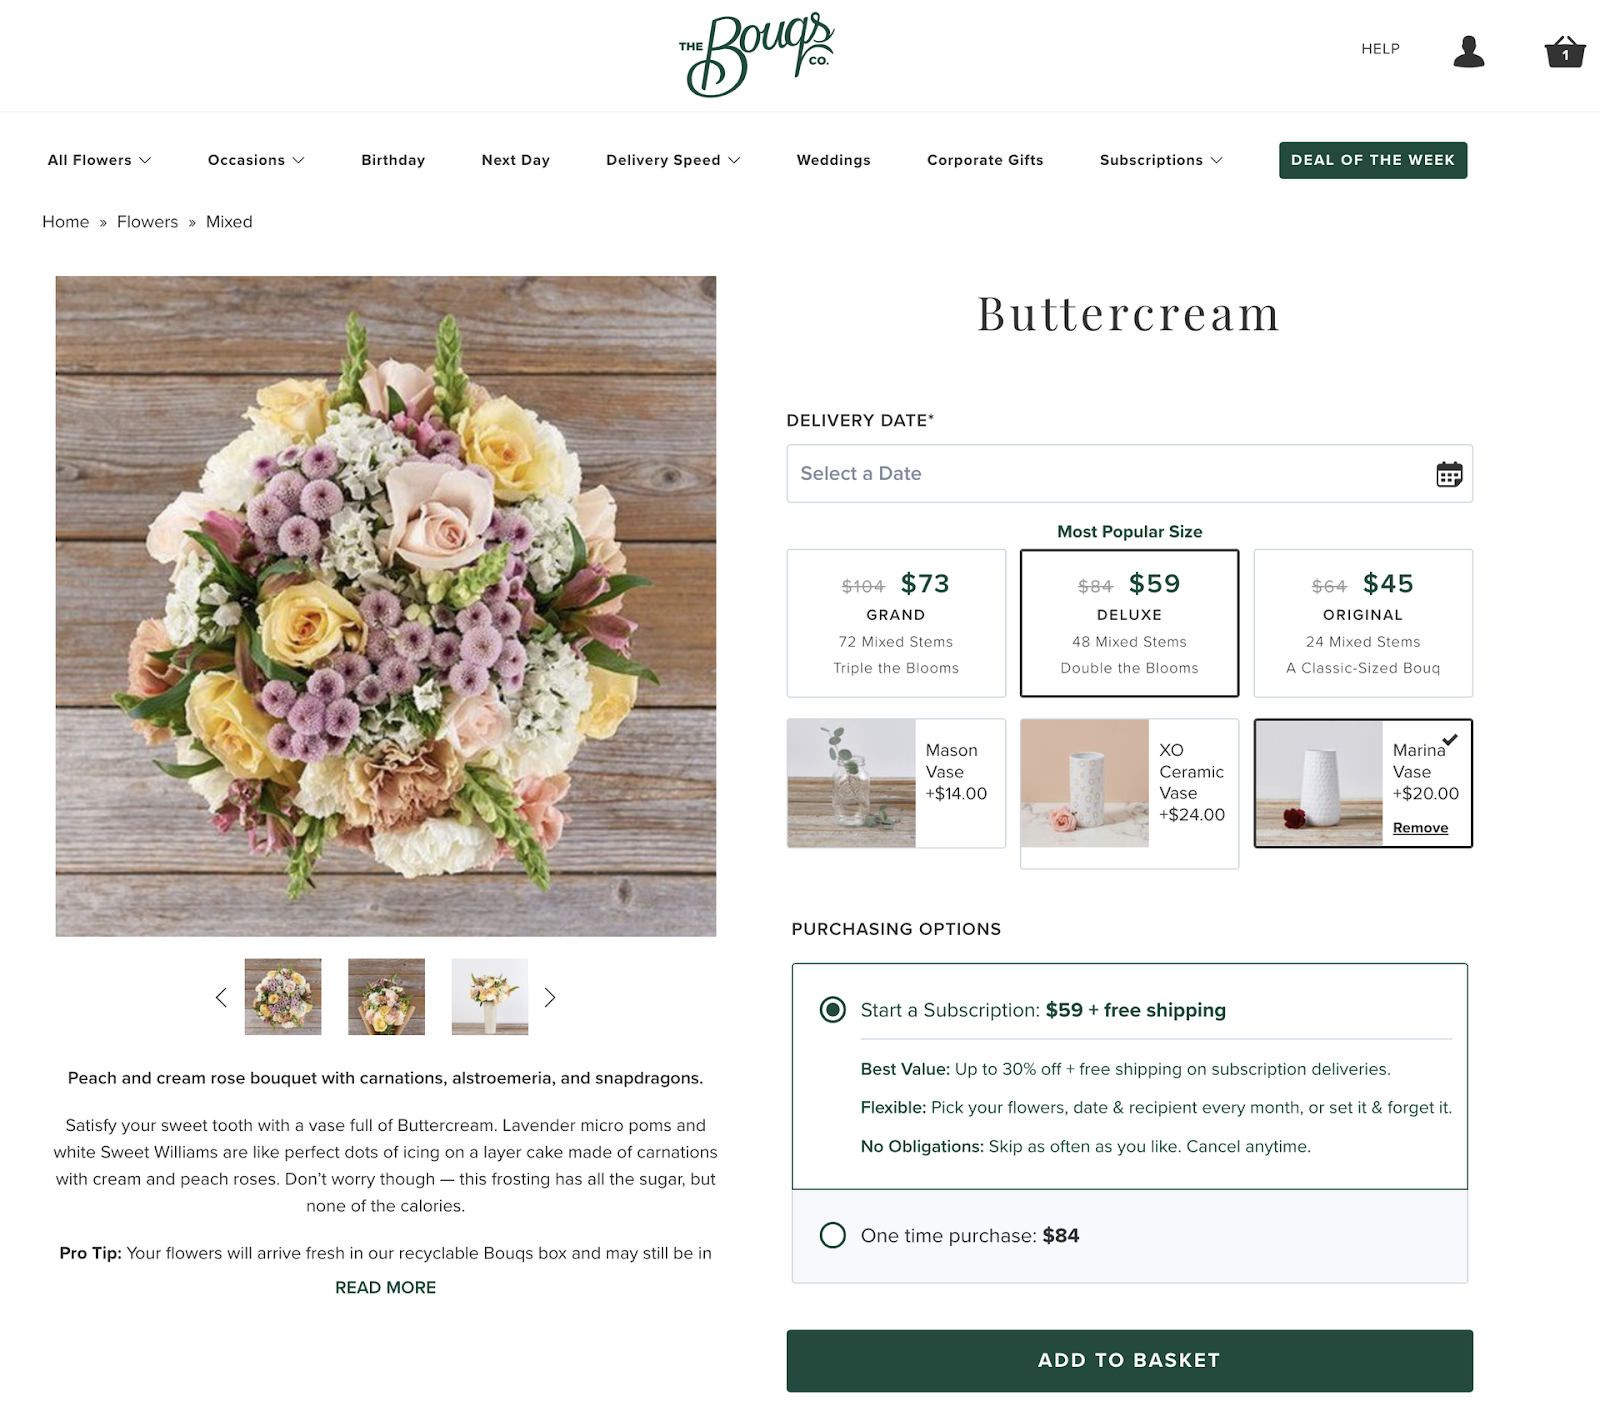 ecommerce trend of including subscription options when purchasing products such as on this flower delivery product page